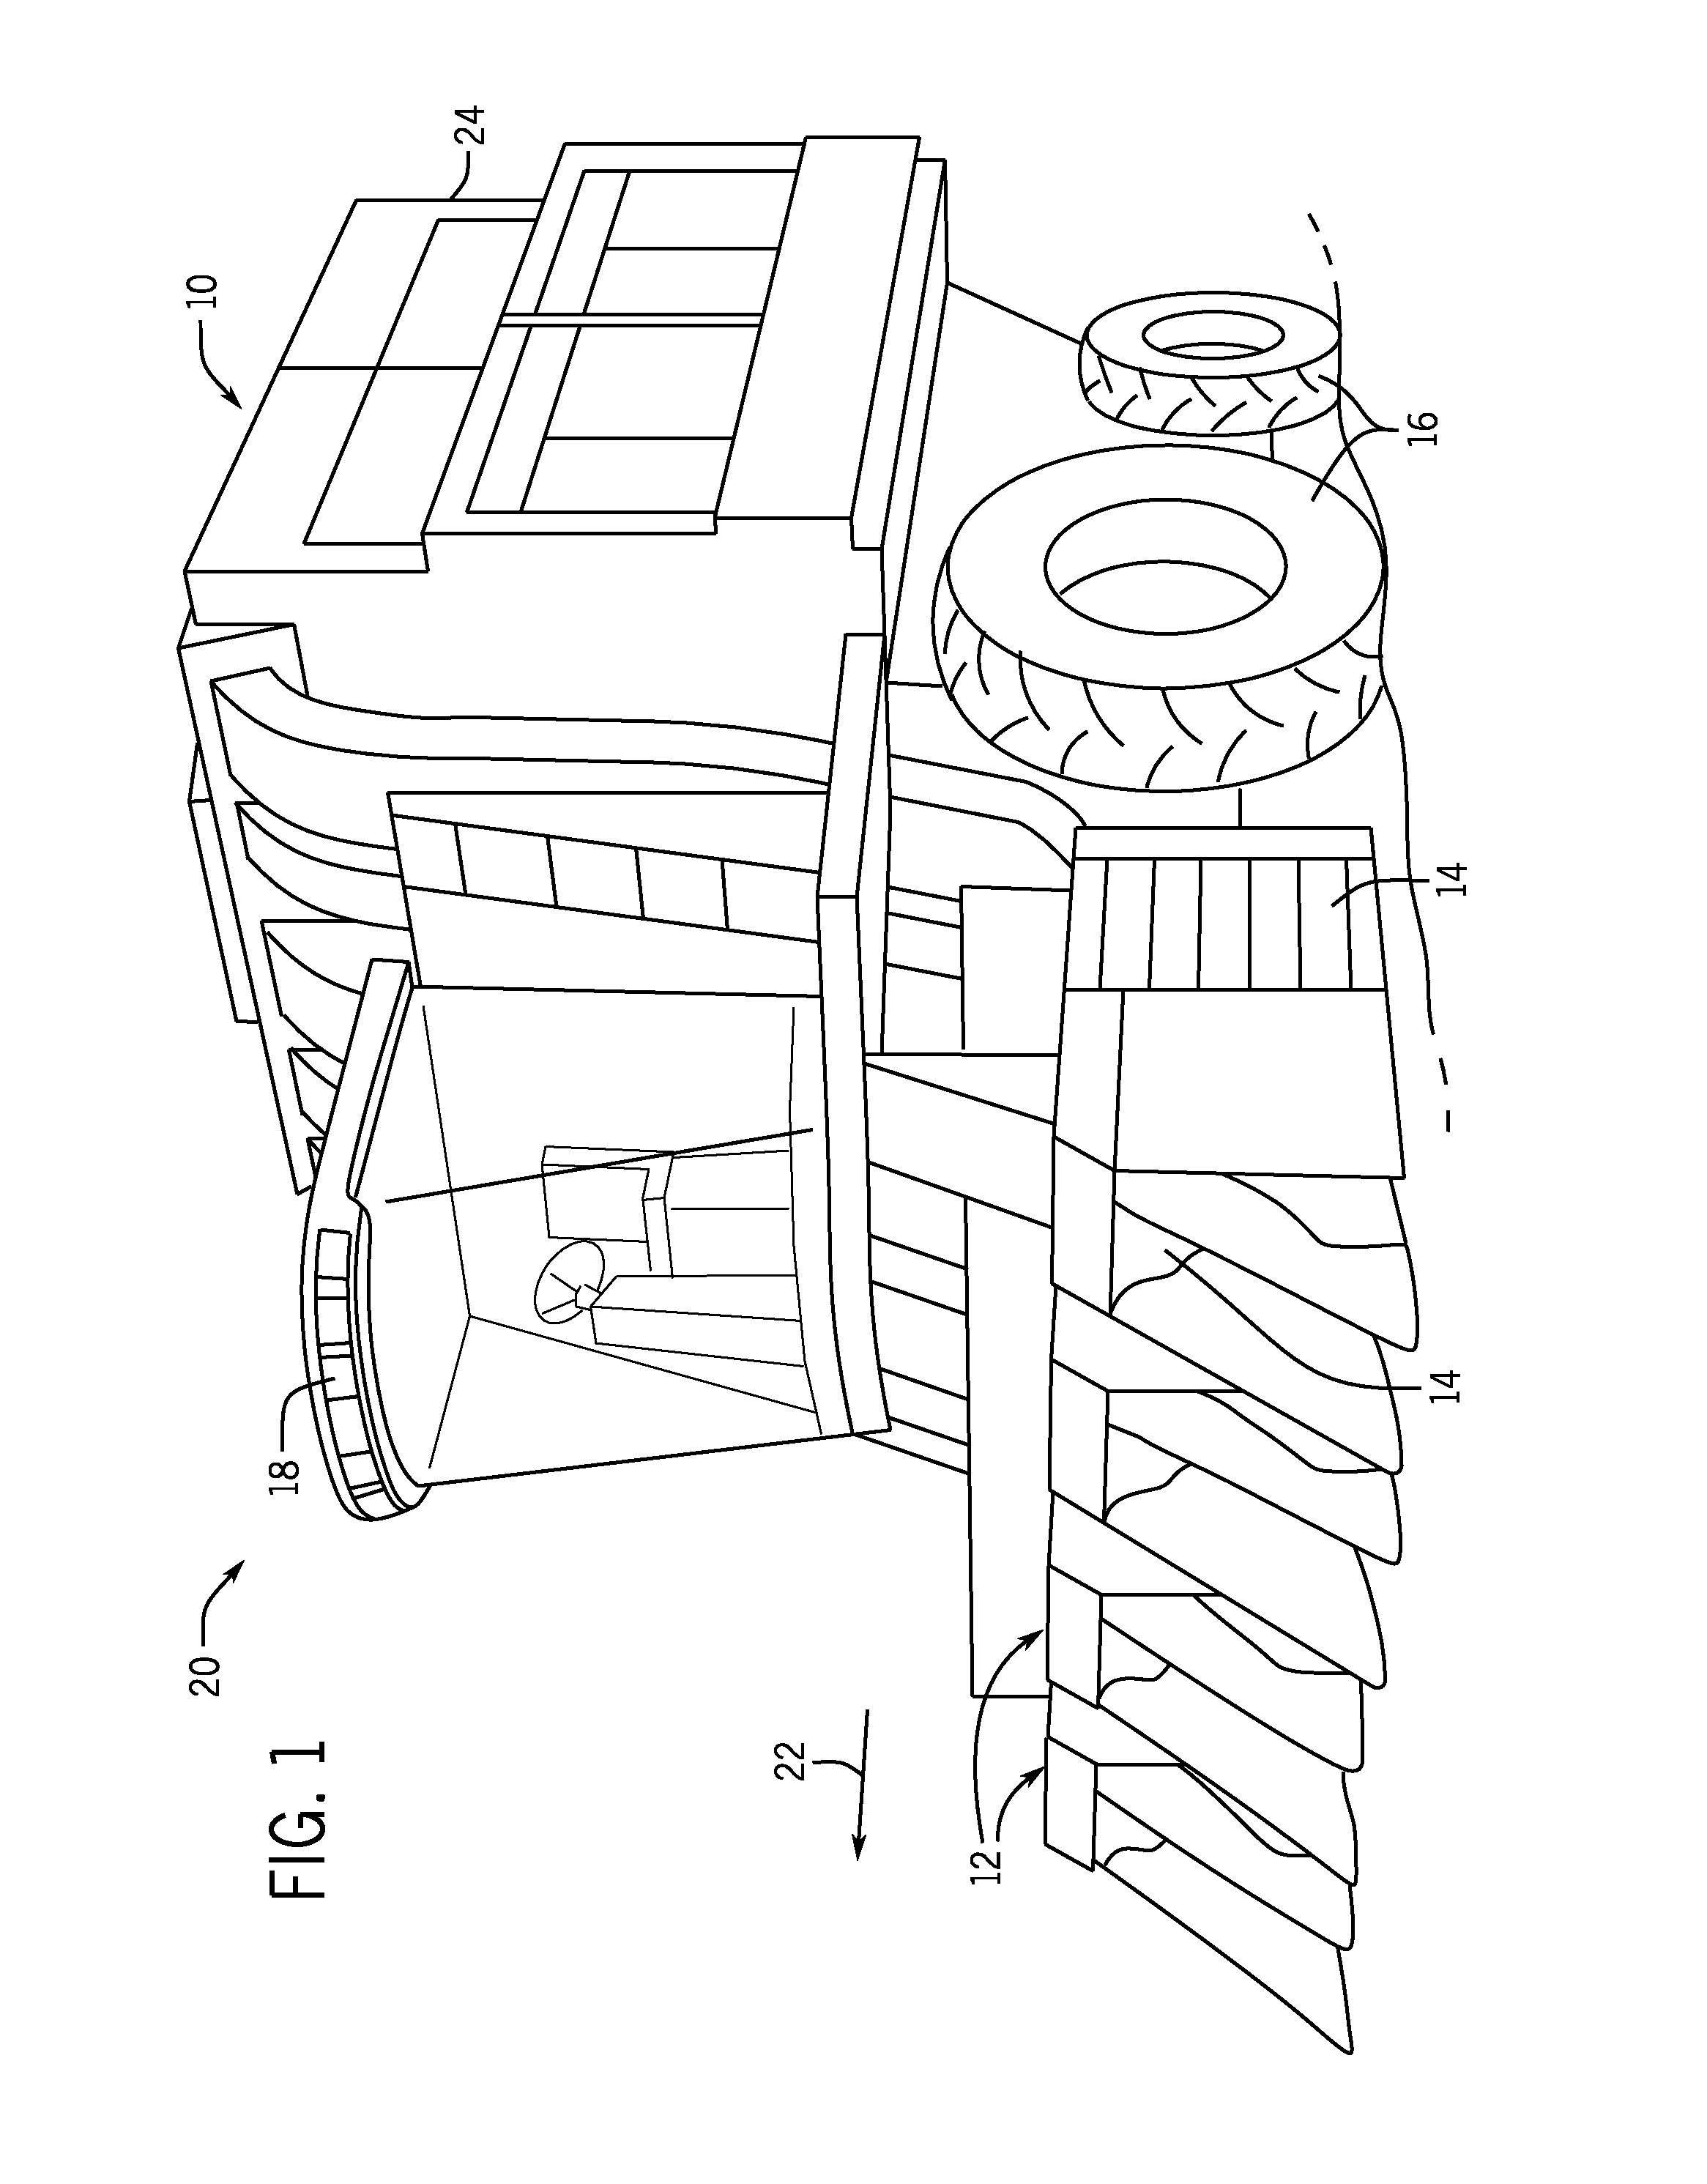 Moisture Control System For An Agricultural Harvester